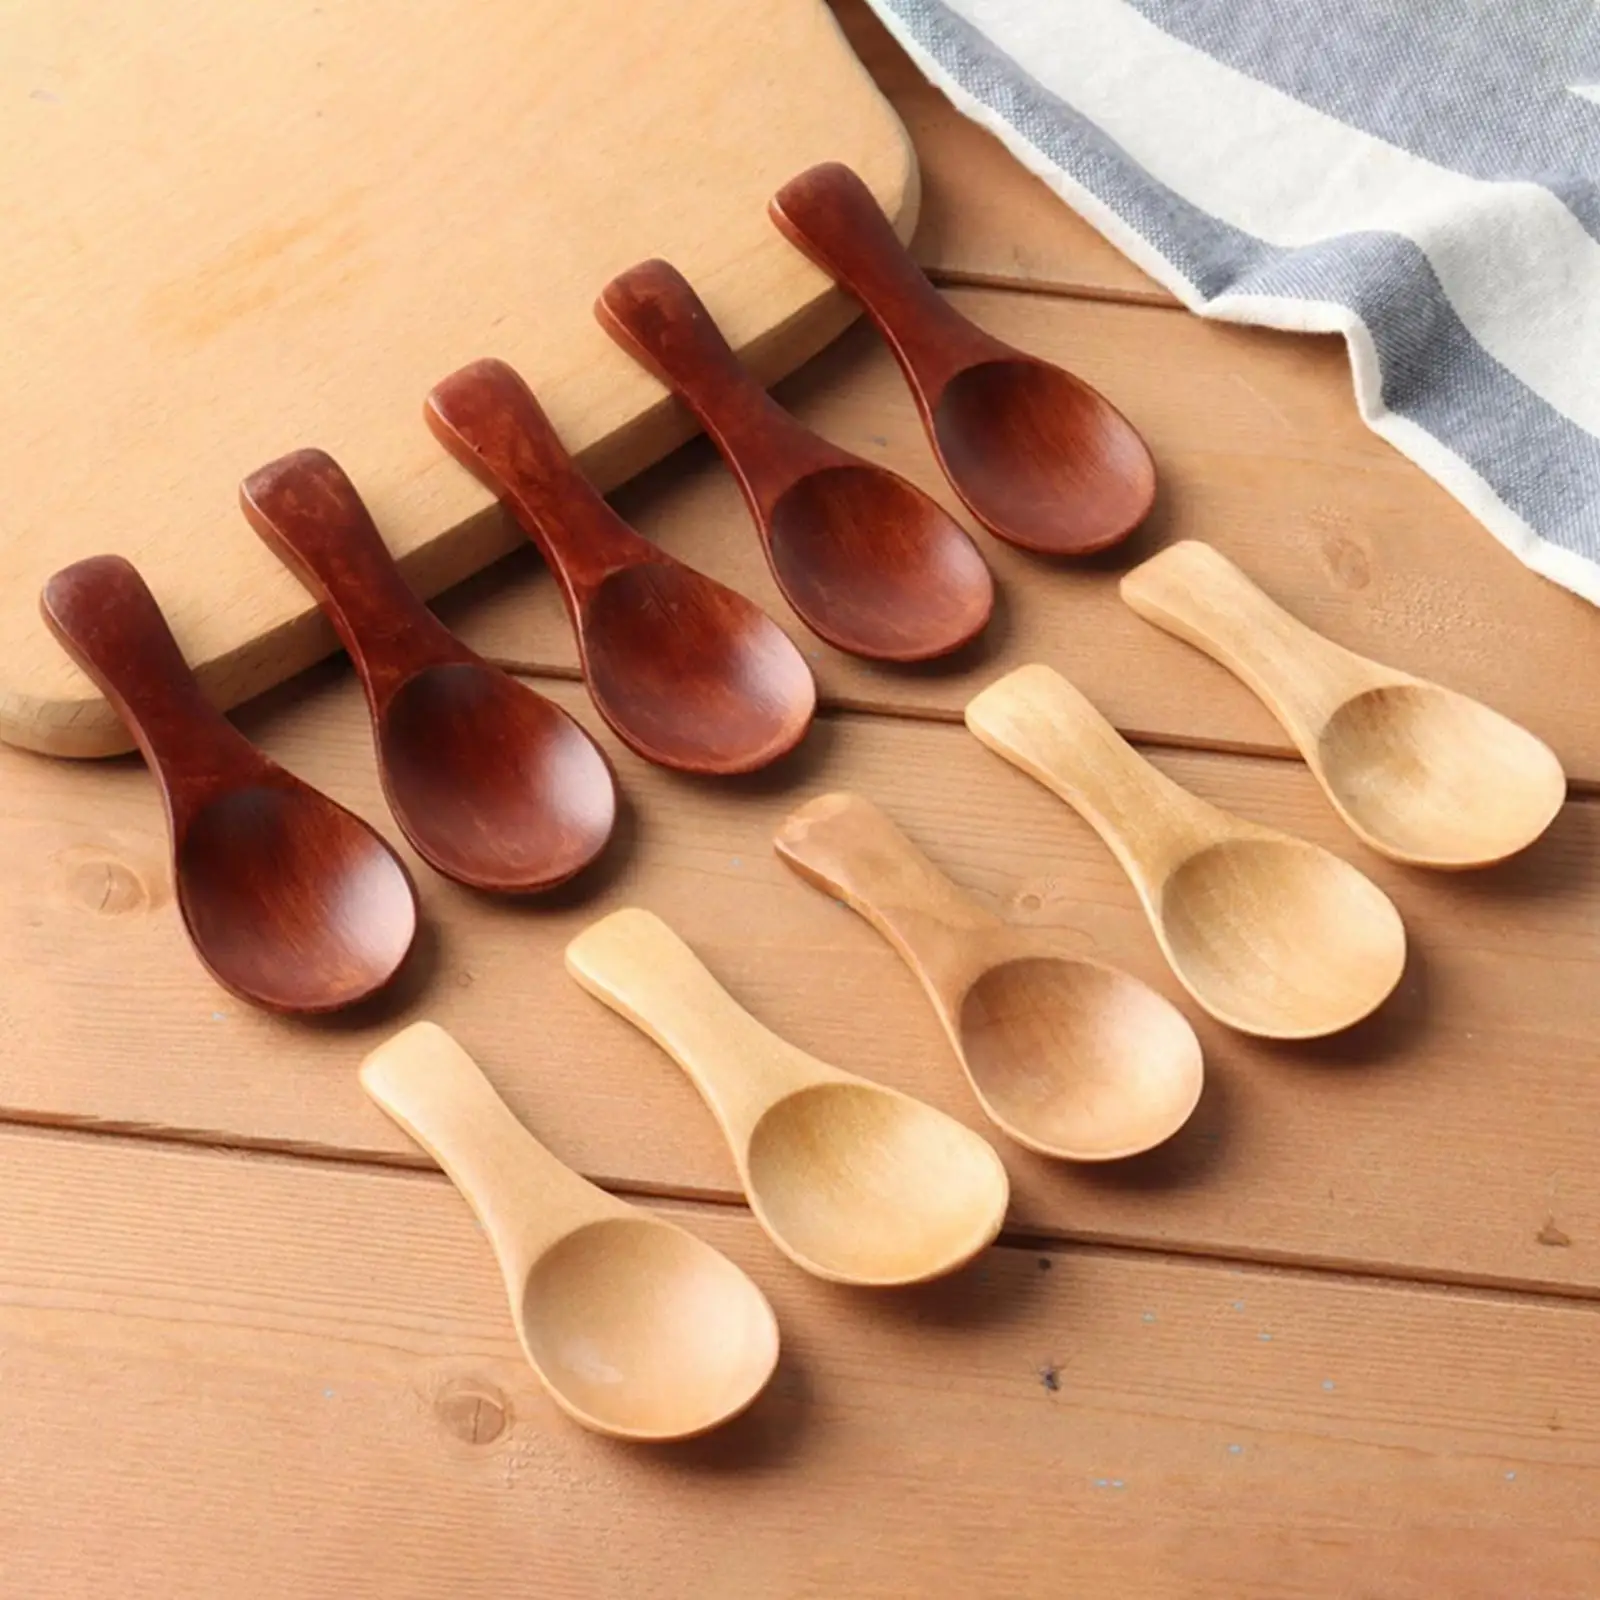 10 Pieces Condiments Spoon with Short Handle Small Wooden Spoons for Spice